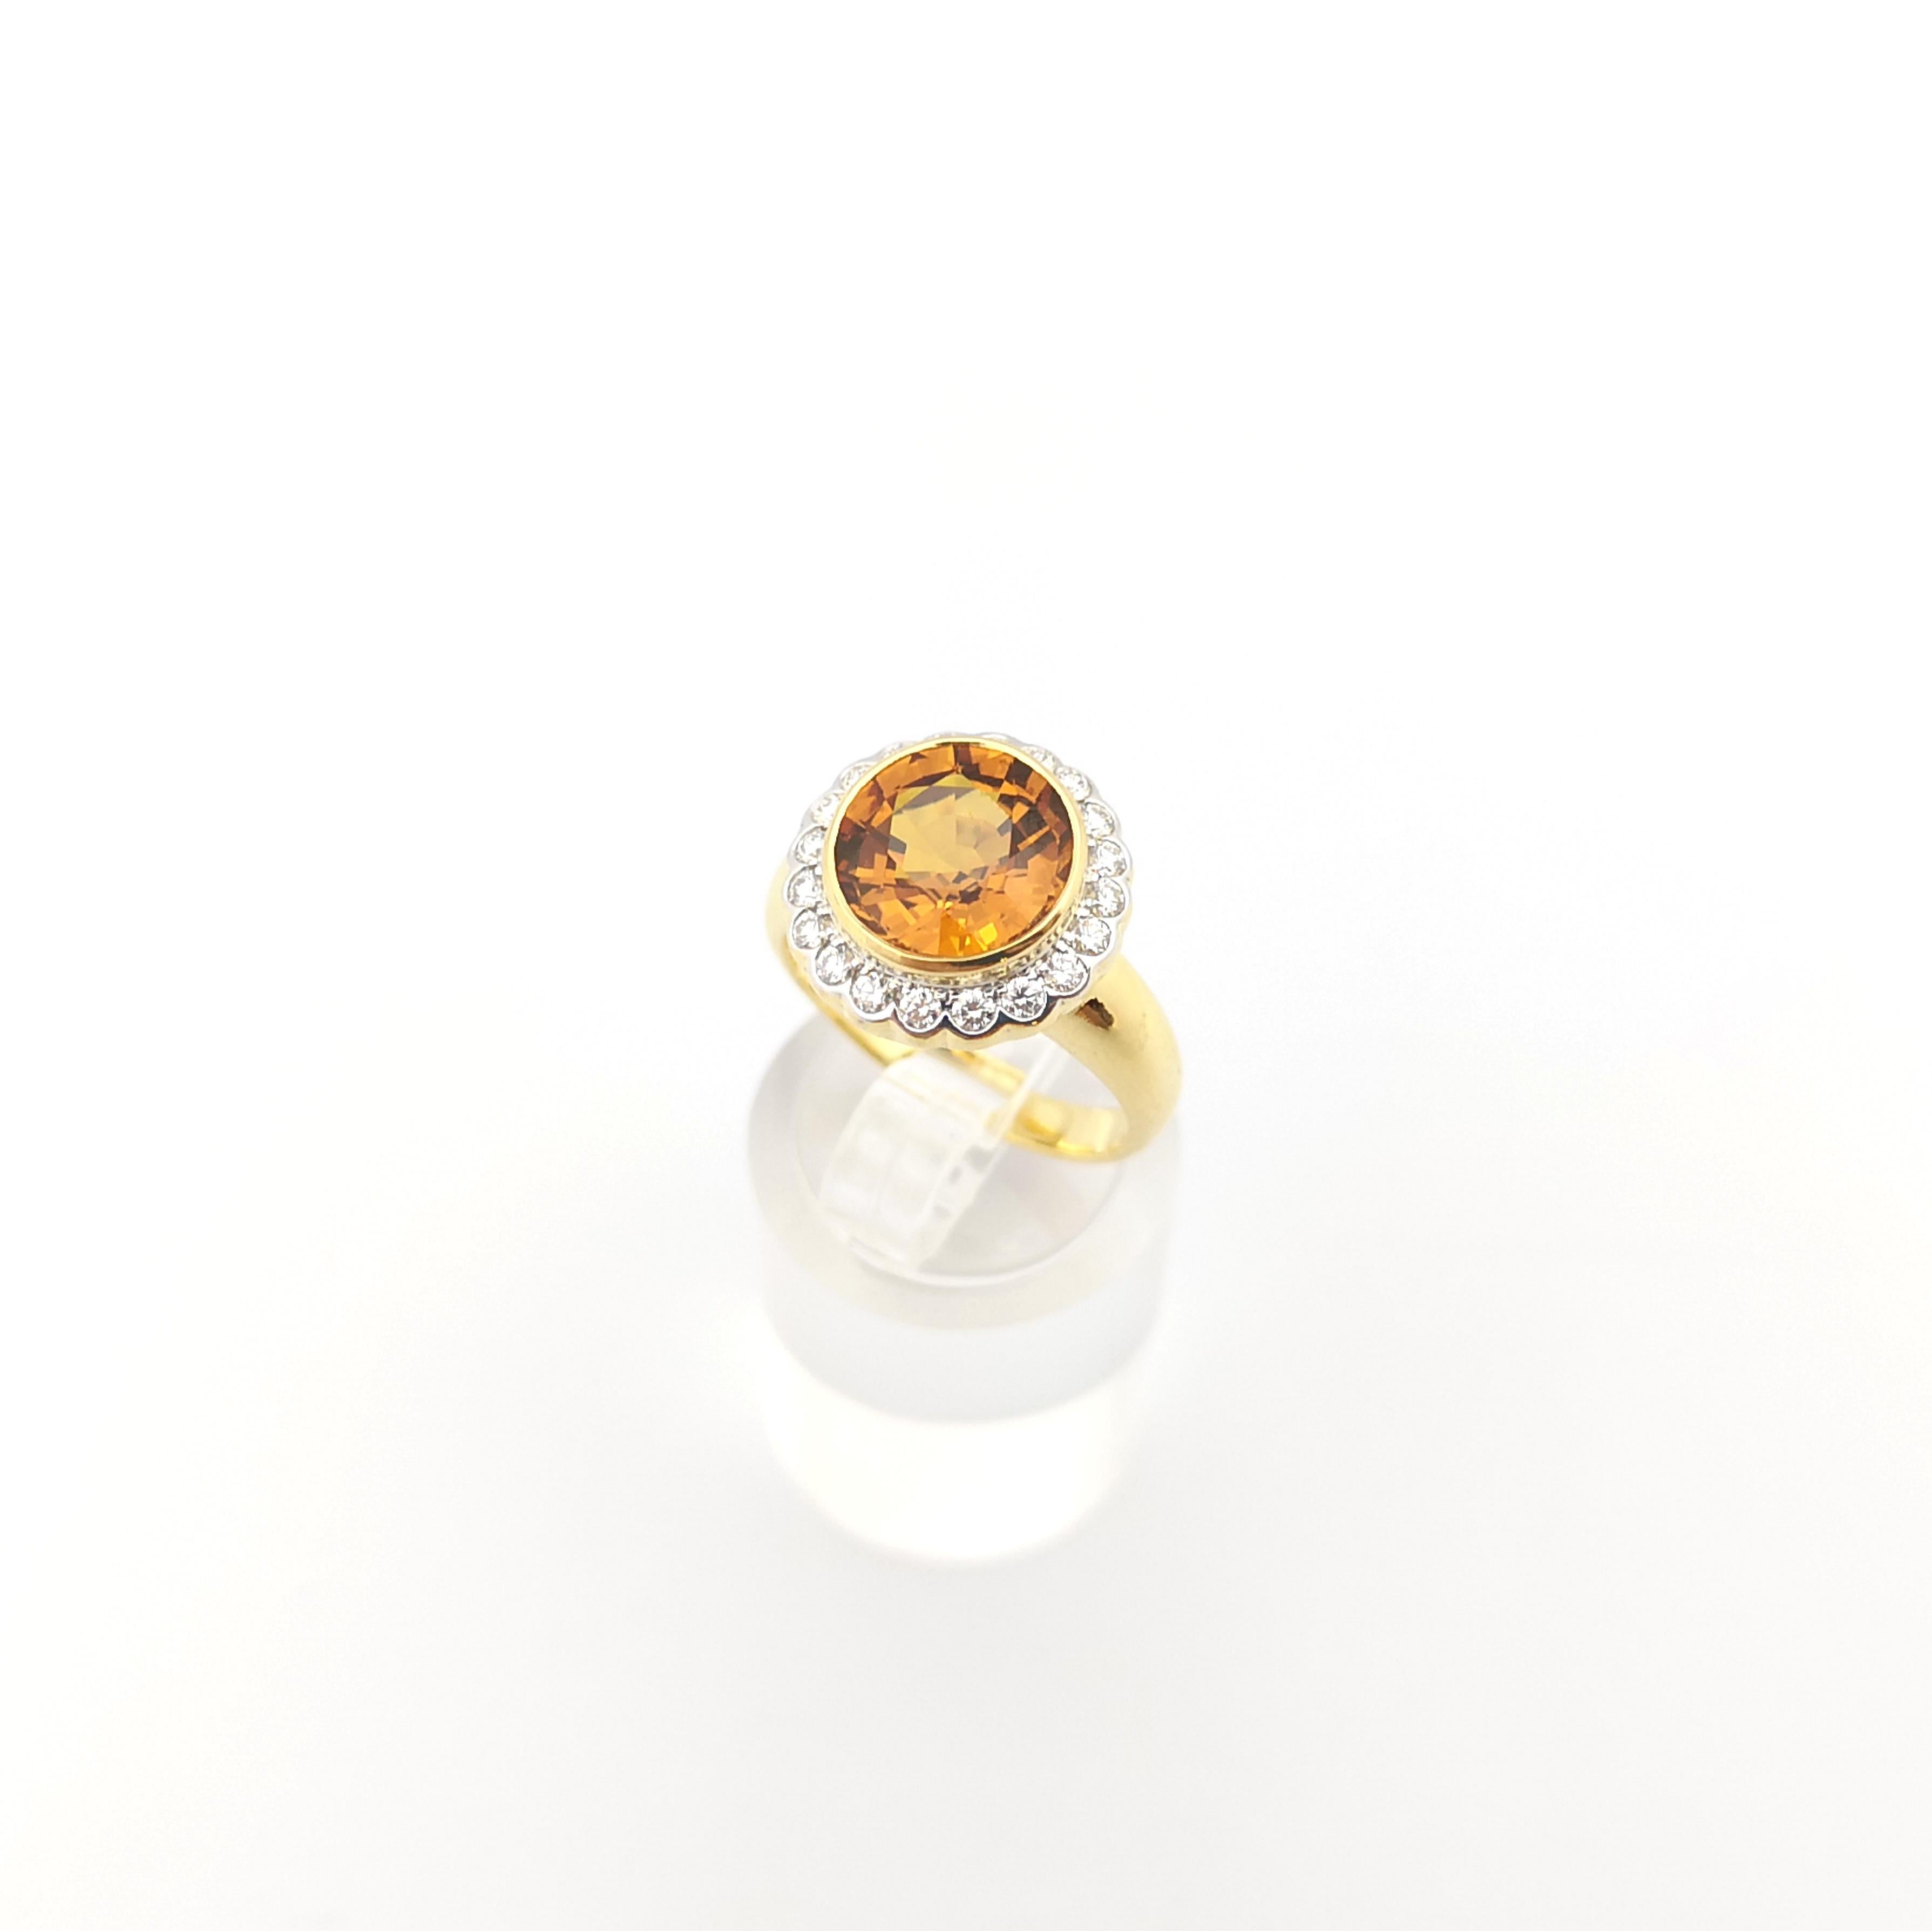 Yellow Sapphire with Diamond Ring set in 18K Gold Setting For Sale 6